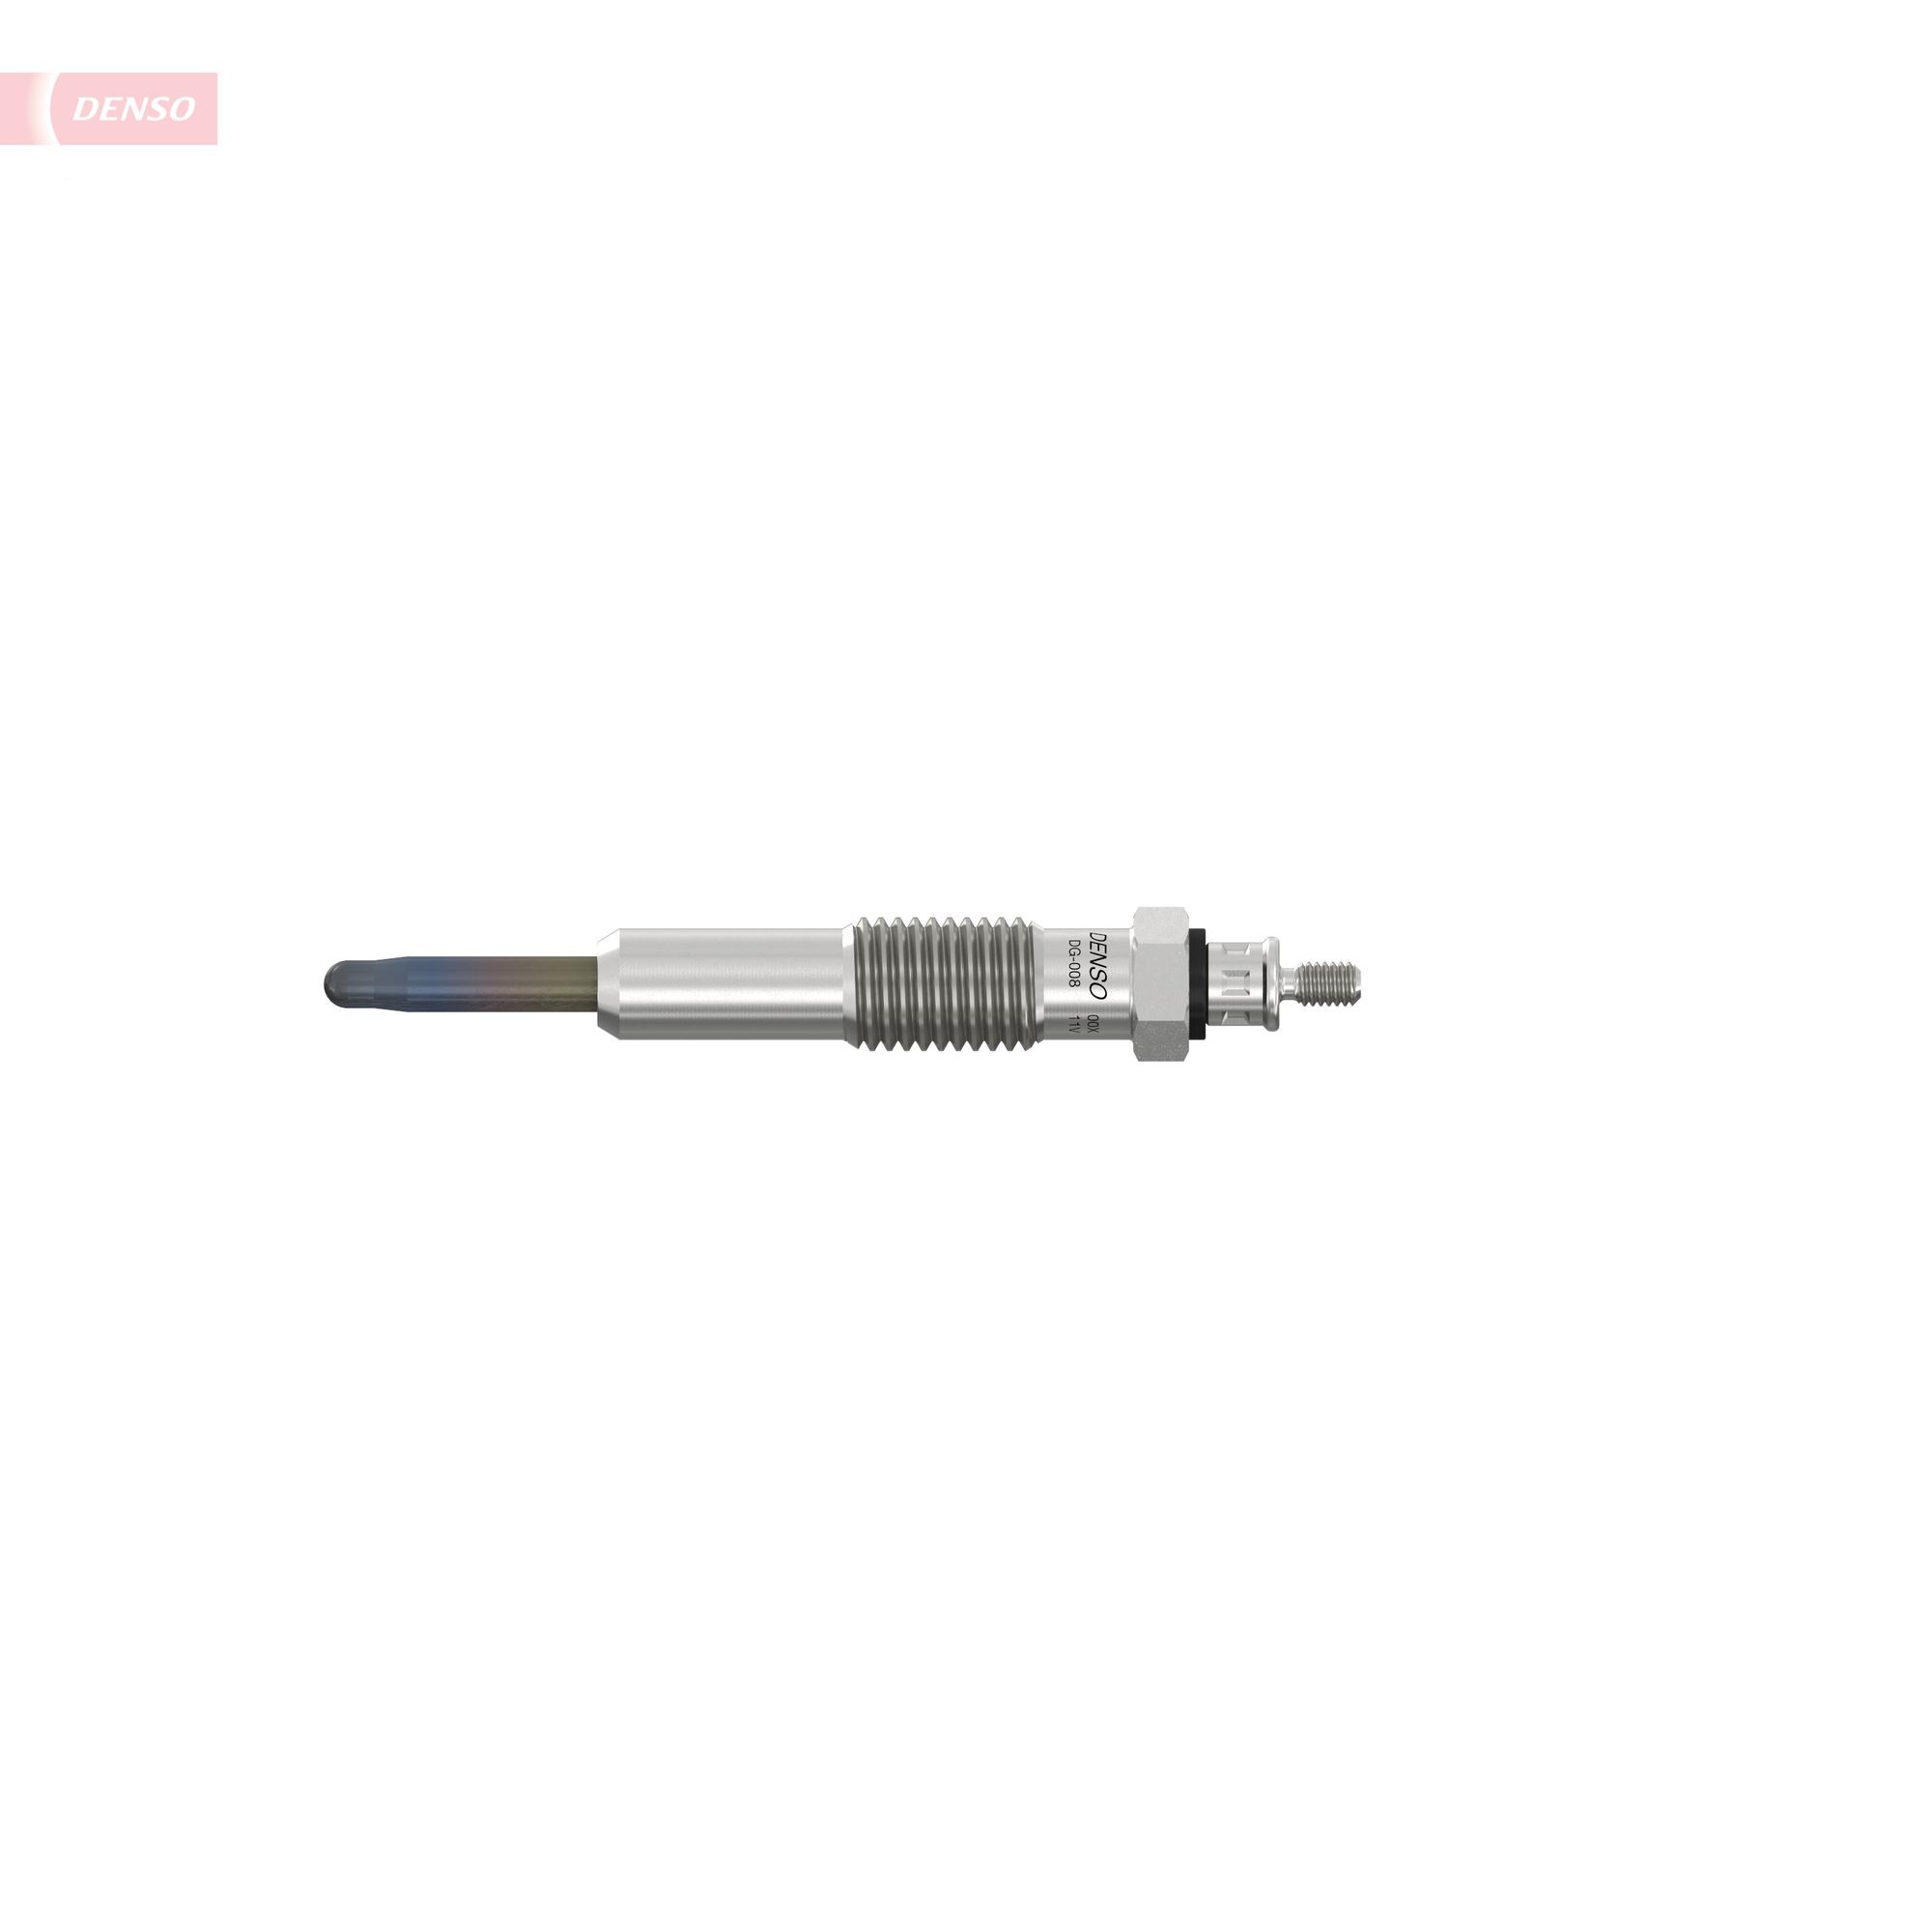 Great value for money - DENSO Glow plug DG-008